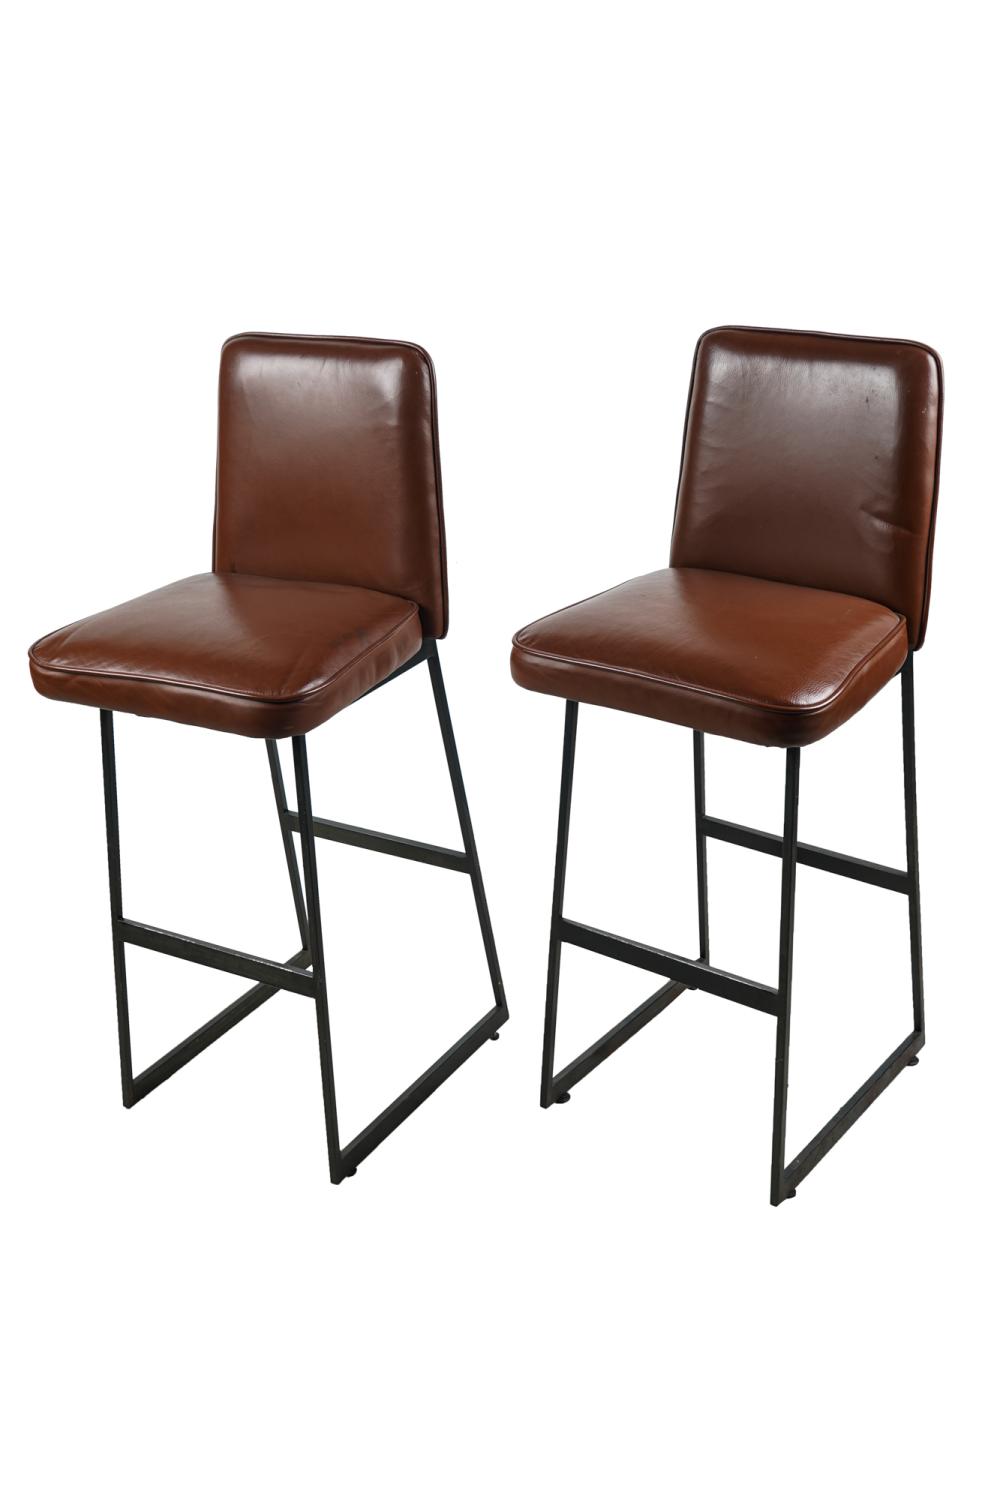 PAIR OF METAL LEATHER CONTEMPORARY 336a0b